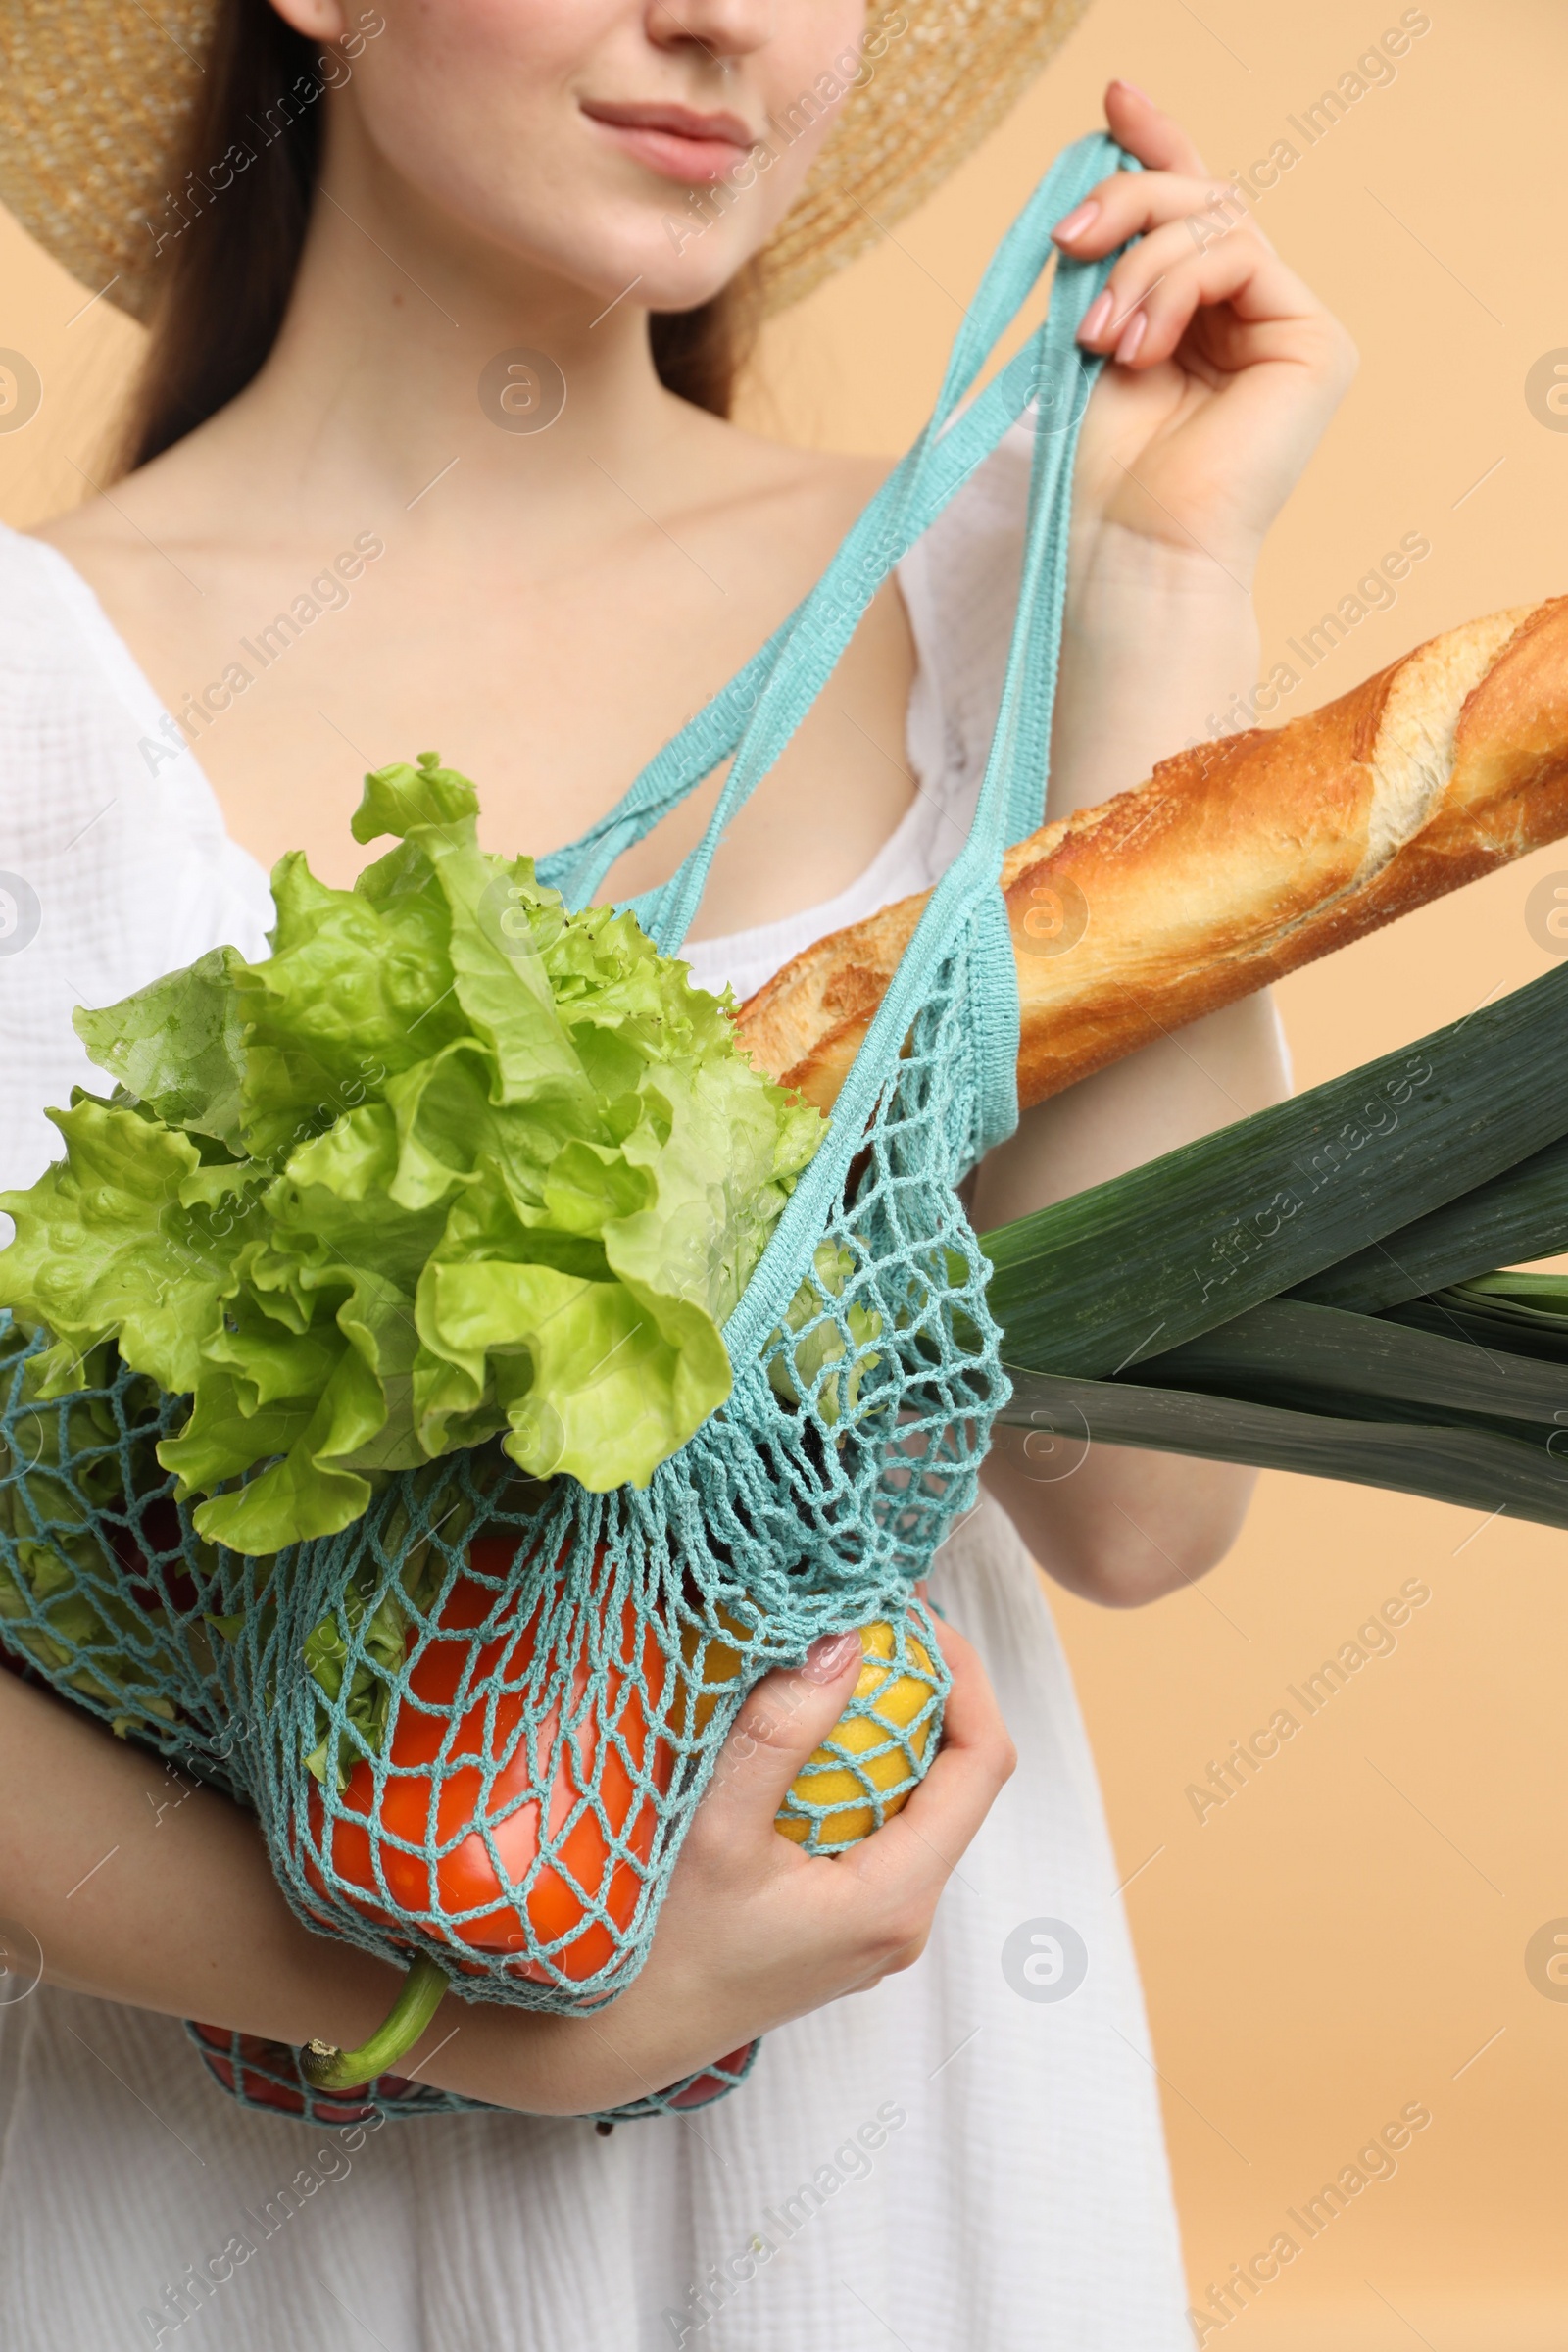 Photo of Woman with string bag of fresh vegetables and baguette on beige background, closeup